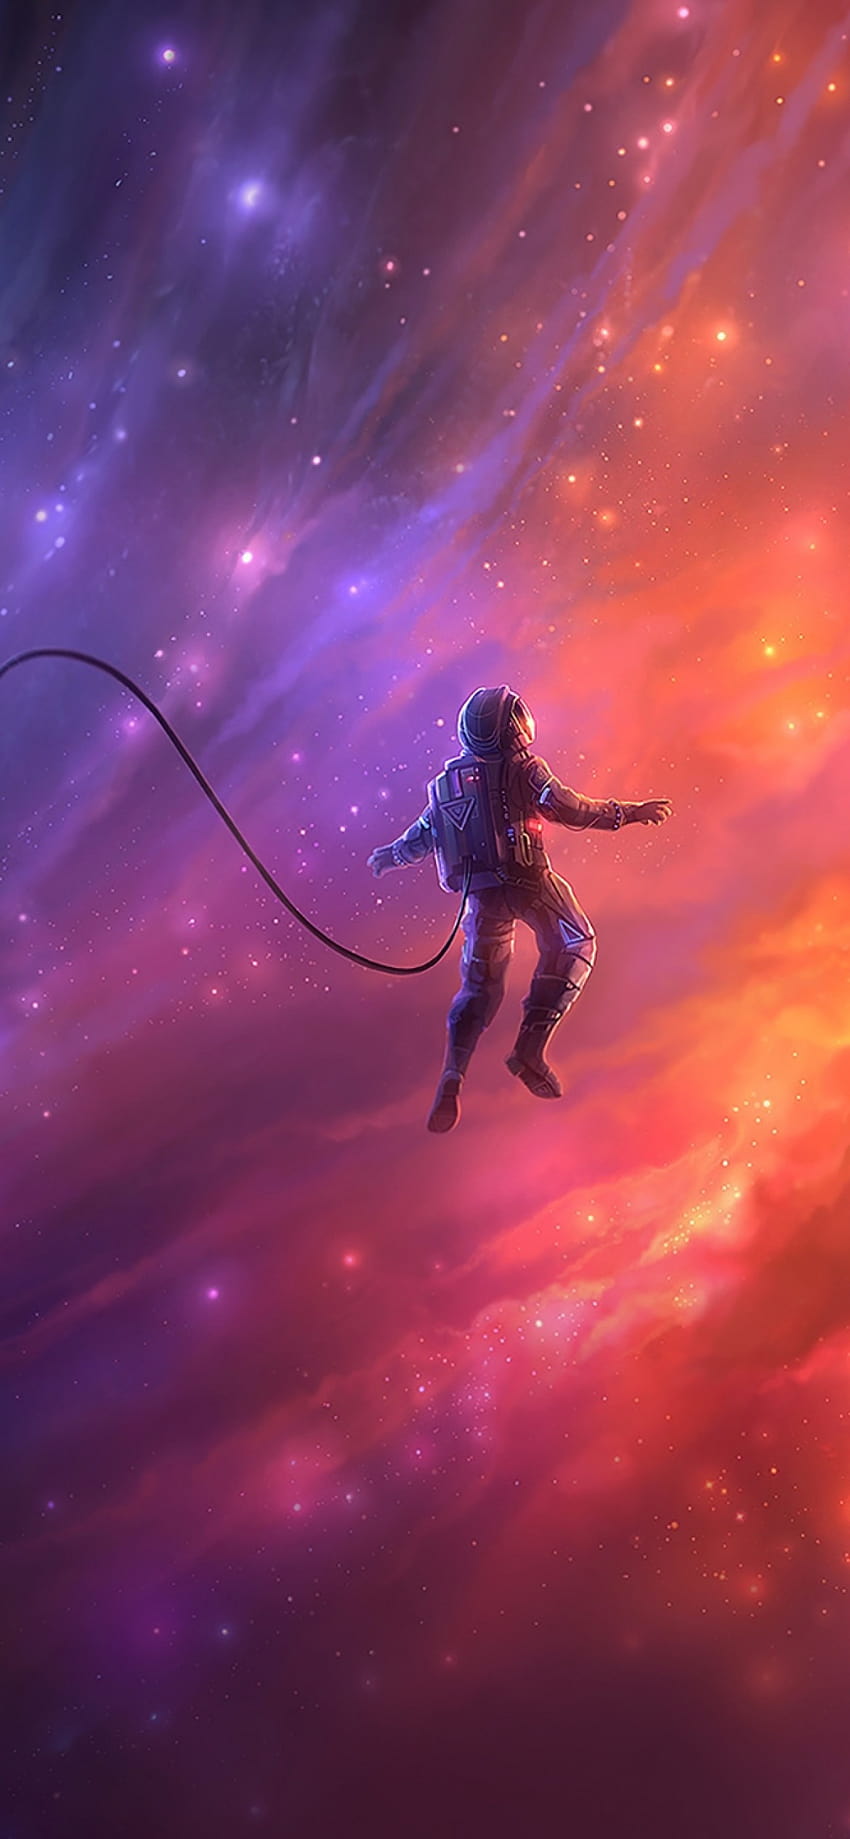 1170x2532 Floating Astronaut, Colorful Nebula, Dreamy, Orange, Two Paths for iPhone 12 Pro HD phone wallpaper